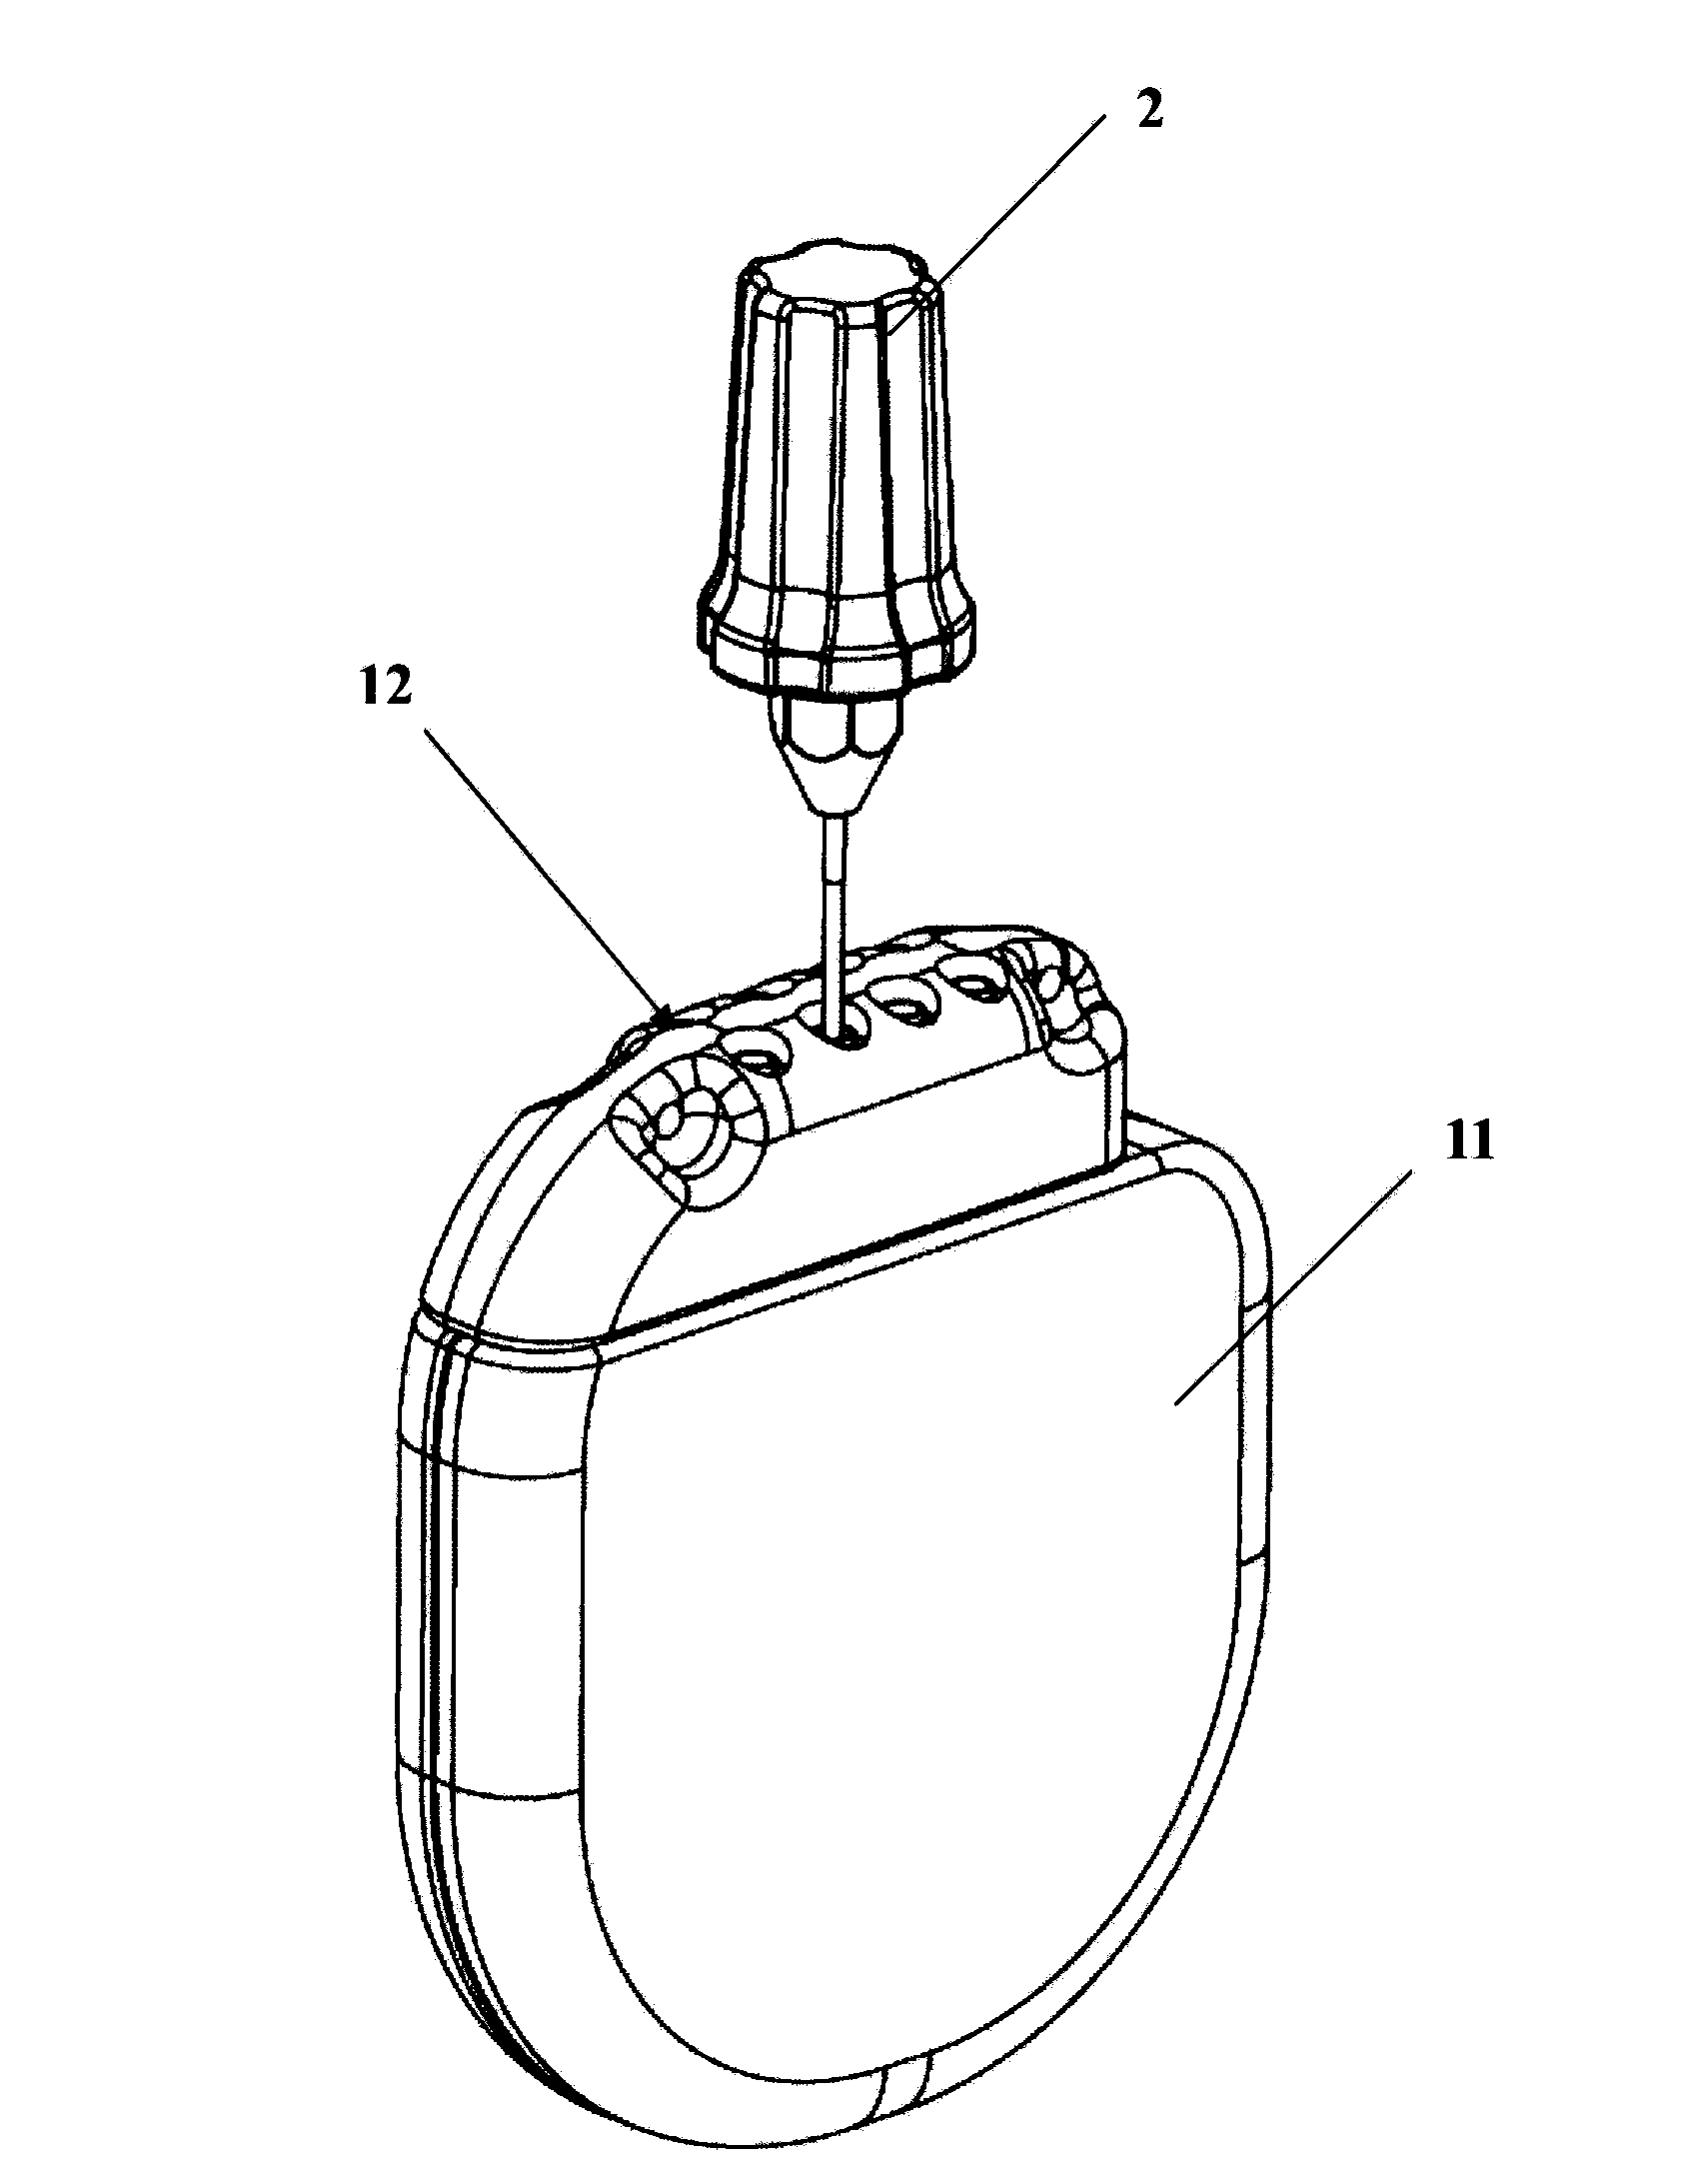 Implantable medical device and system with structure for preventing screw-out of screws